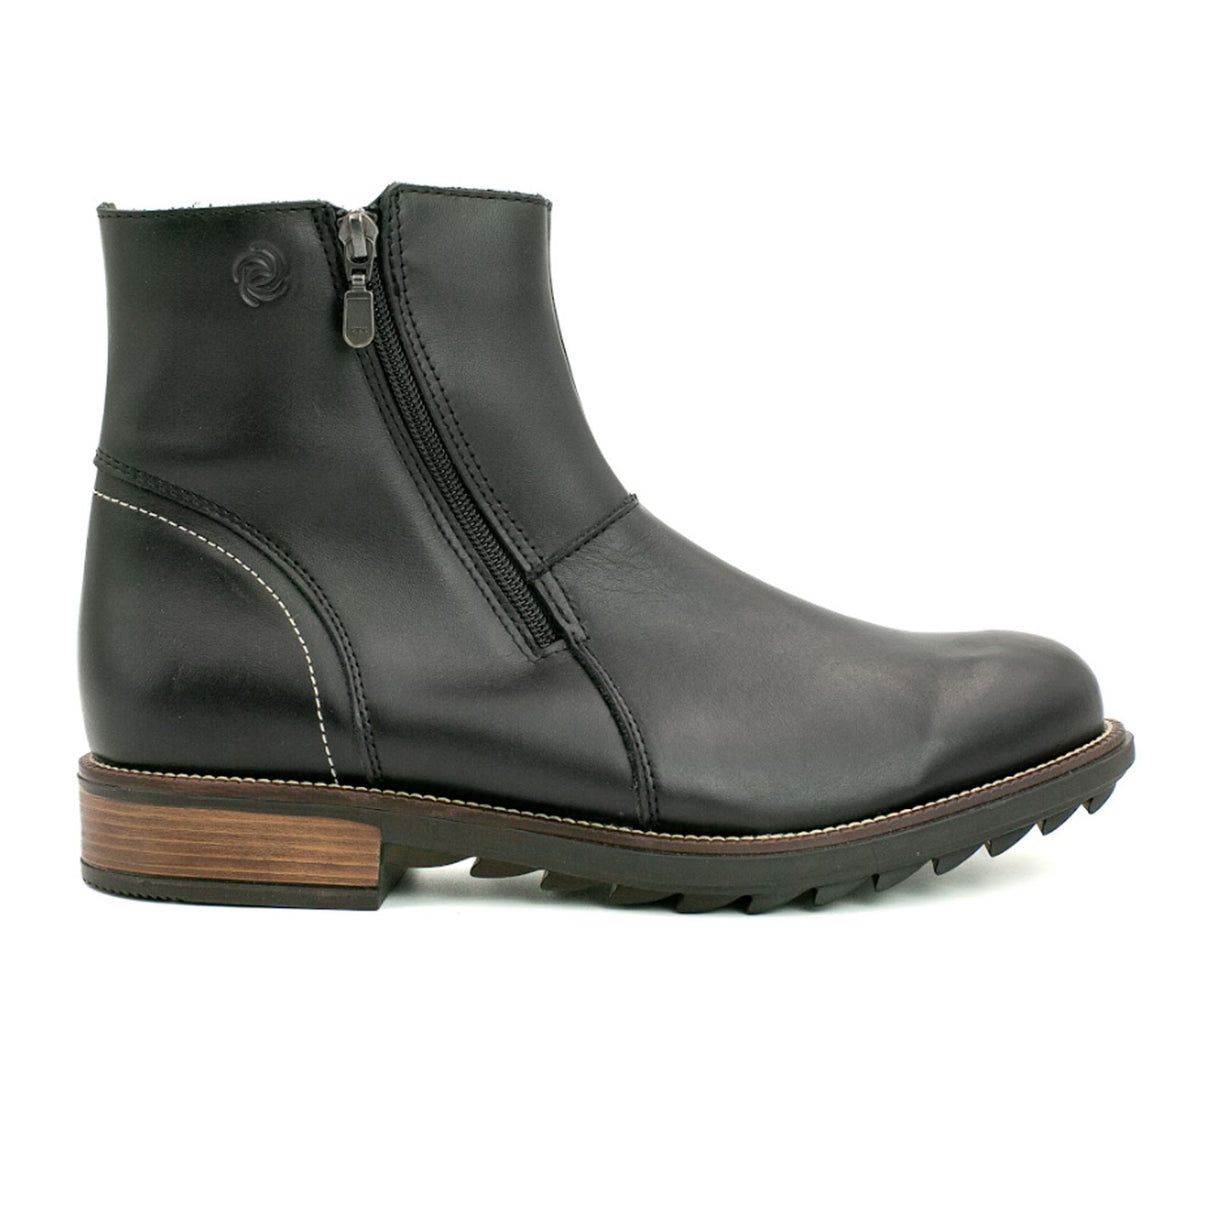 Martino Arsene (Men) - Black Boots - Fashion - Ankle Boot - The Heel Shoe Fitters